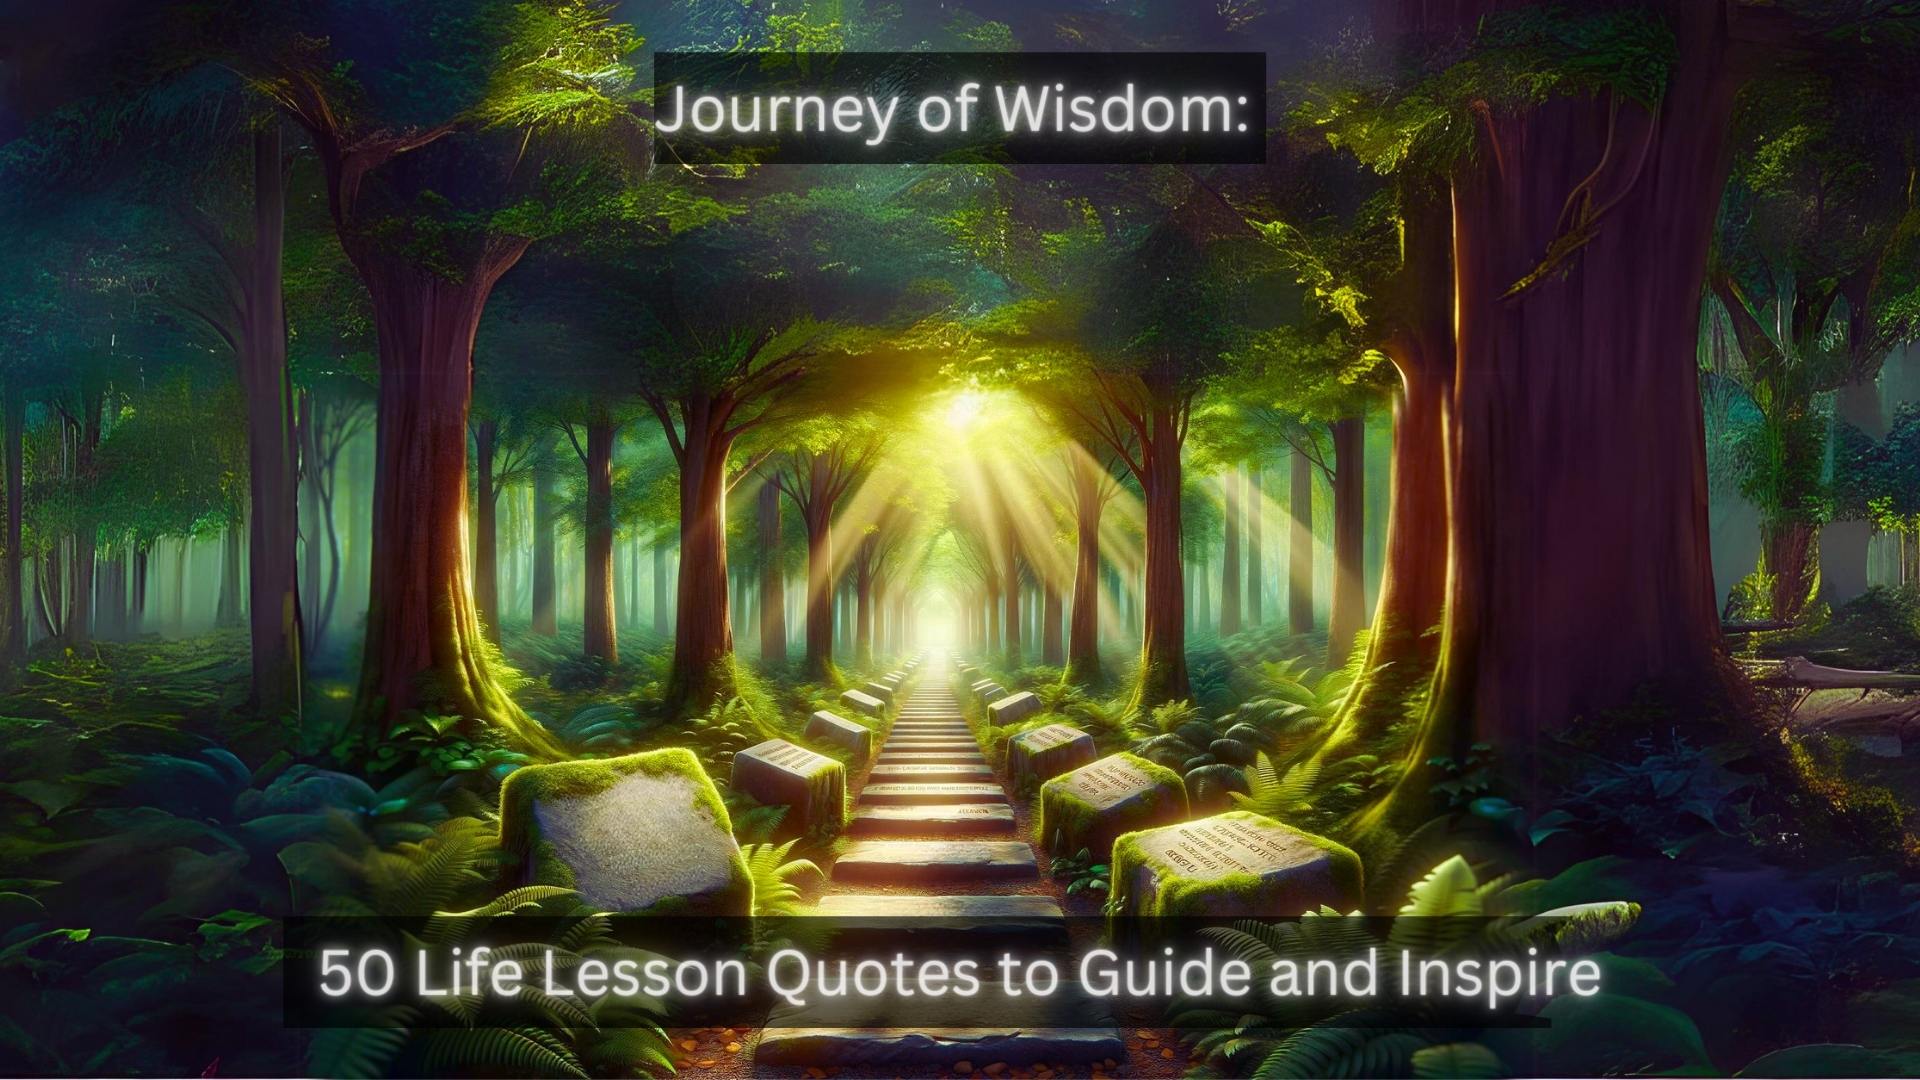 You are currently viewing Journey of Wisdom: 50 Life Lesson Quotes to Guide and Inspire